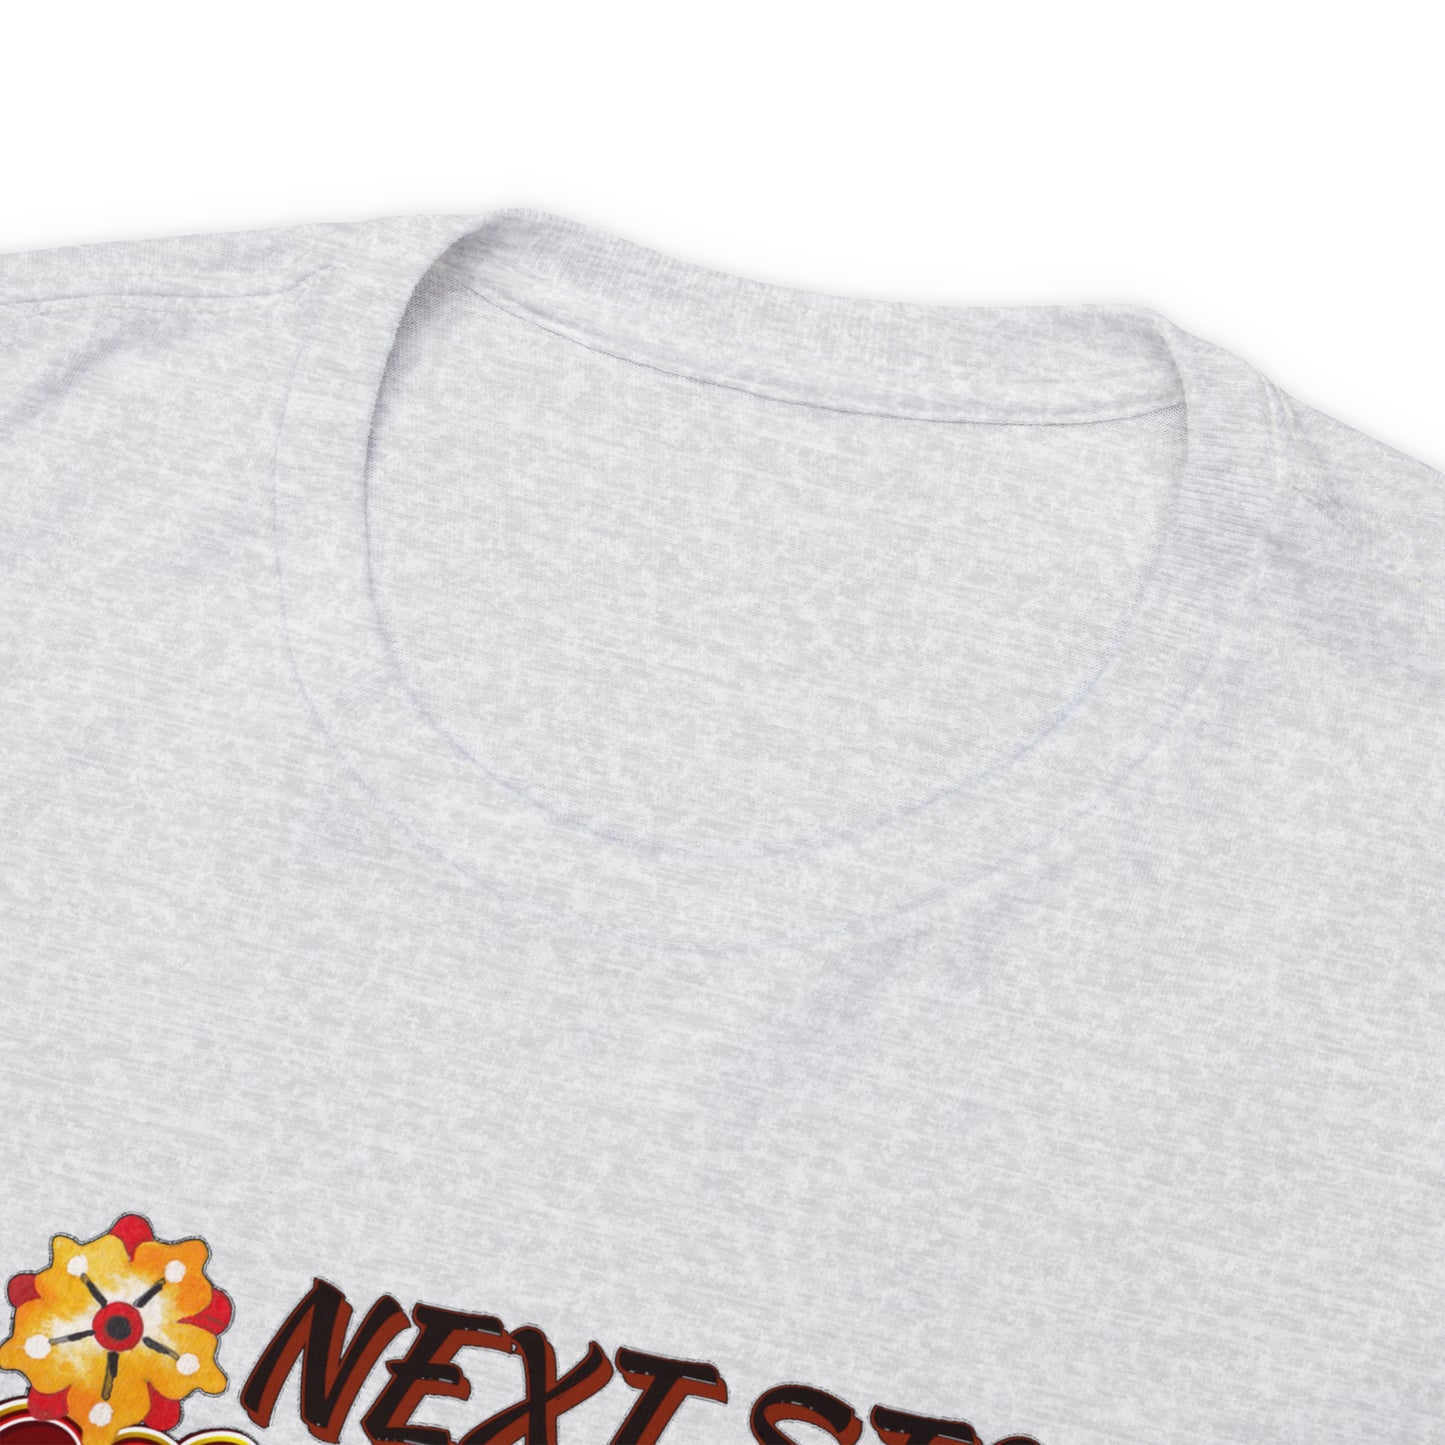 Next Stop Christmas At Your Place - Heavy Cotton Tee for Men and Women